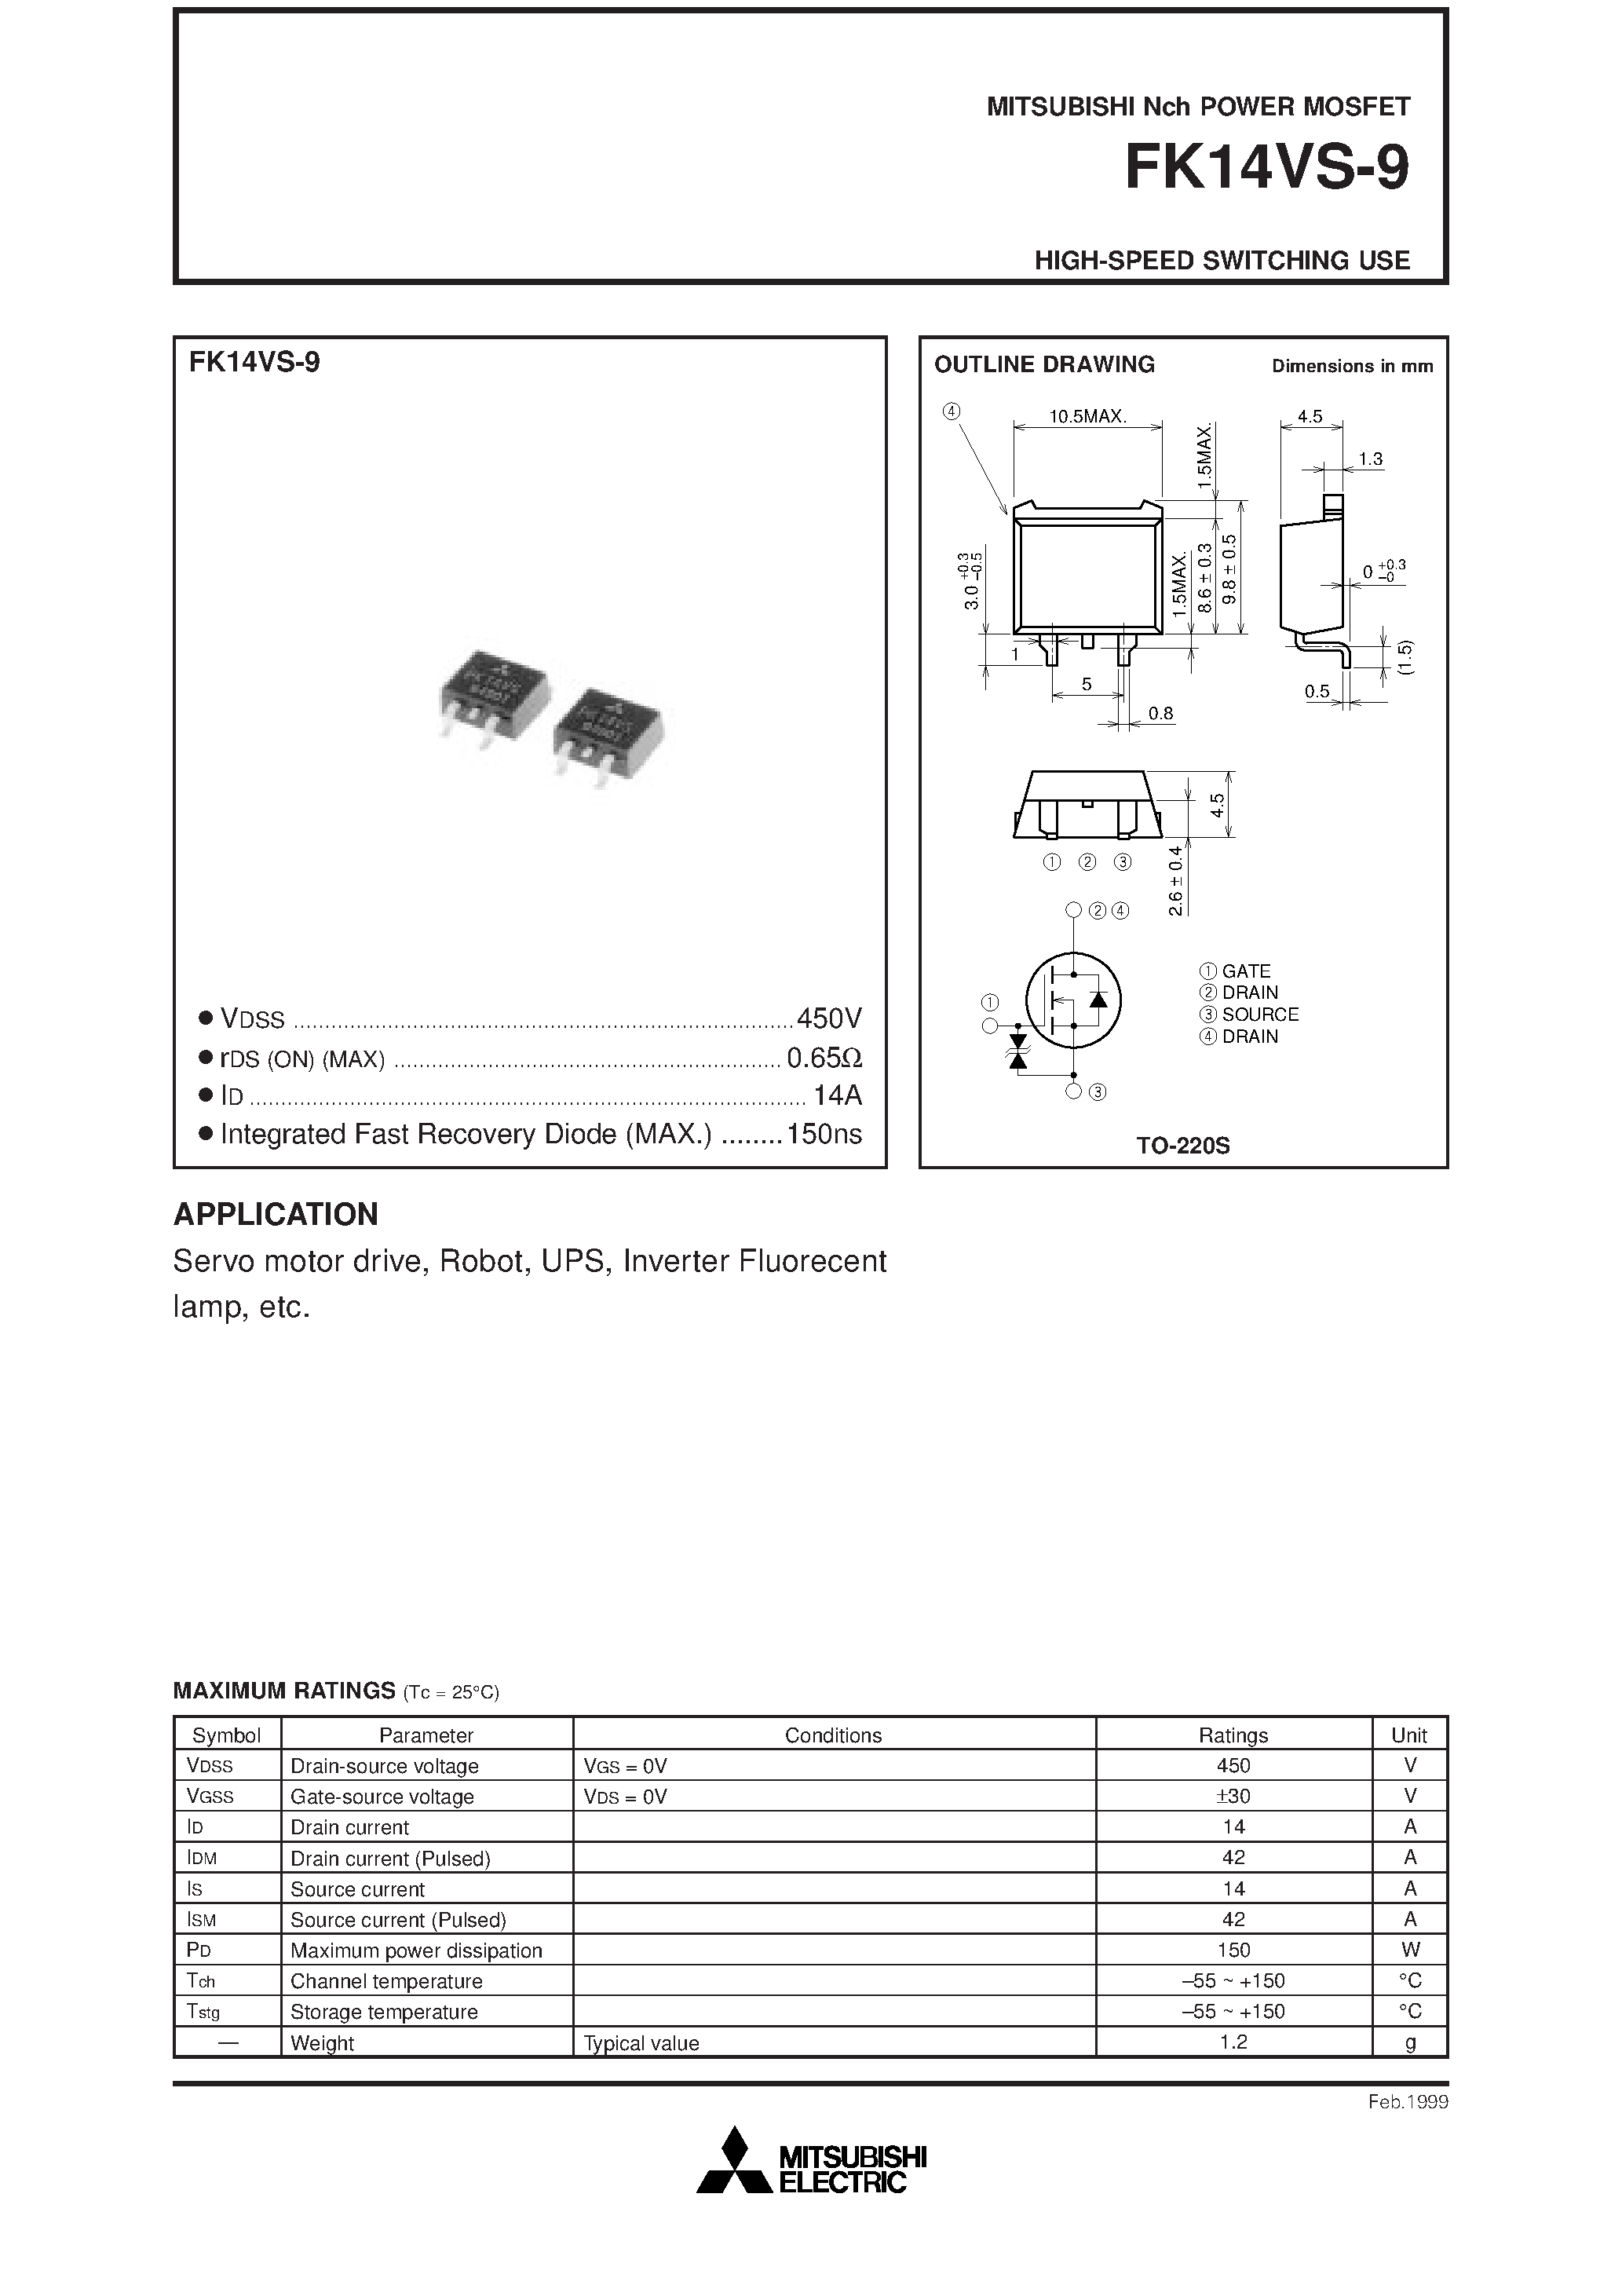 Datasheet FK14VS-9 - Nch POWER MOSFET HIGH-SPEED SWITCHING USE page 1